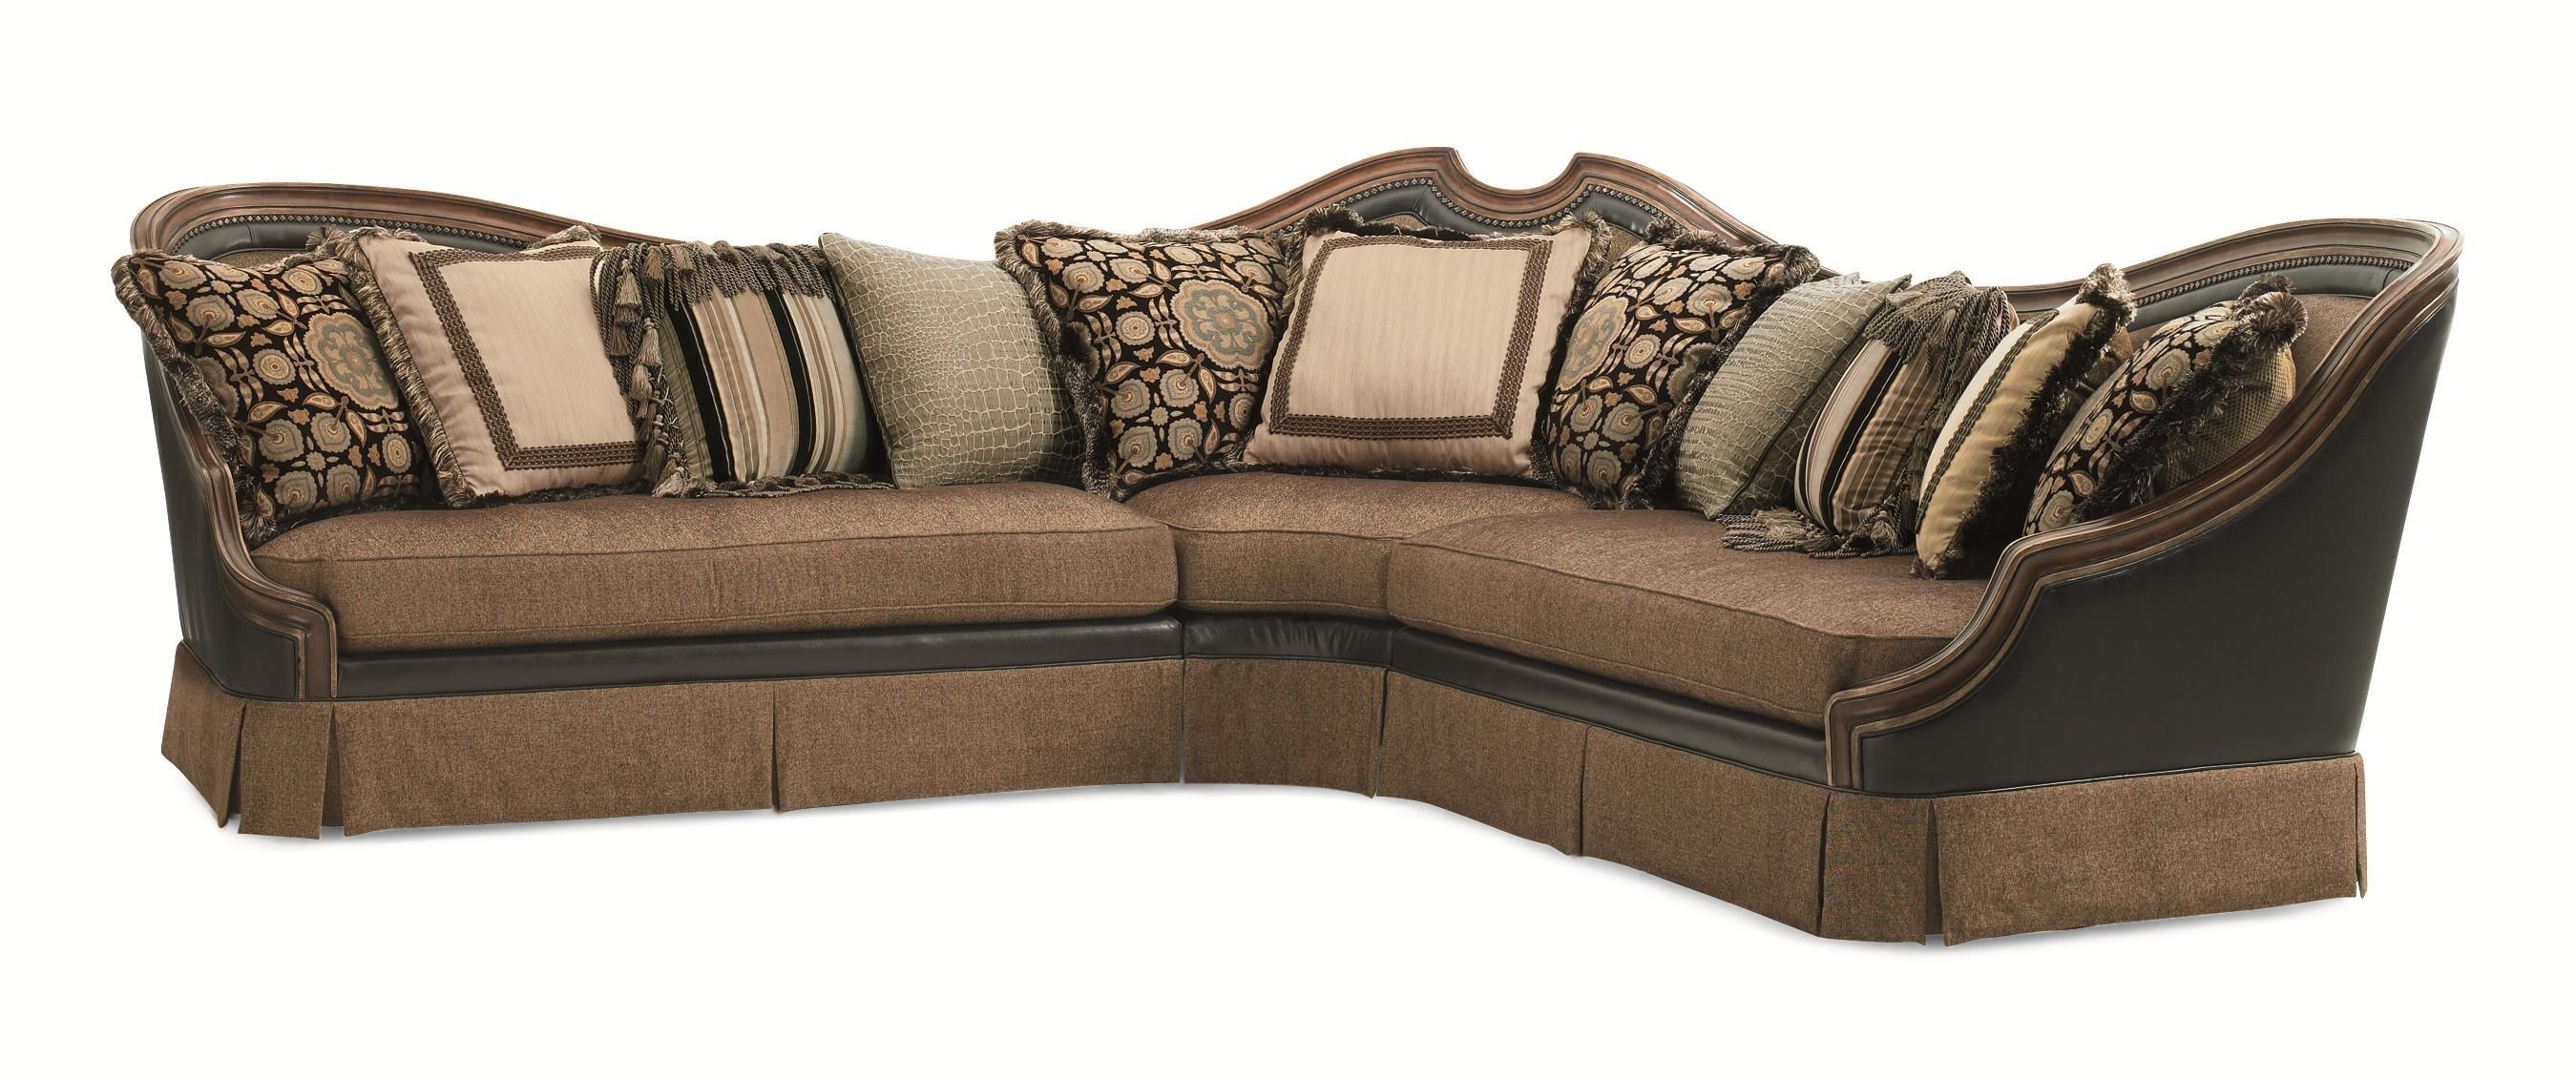 Wyeth Sofa Sectional Groupschnadig | Home Decor | Pinterest Within Nebraska Furniture Mart Sectional Sofas (View 2 of 10)